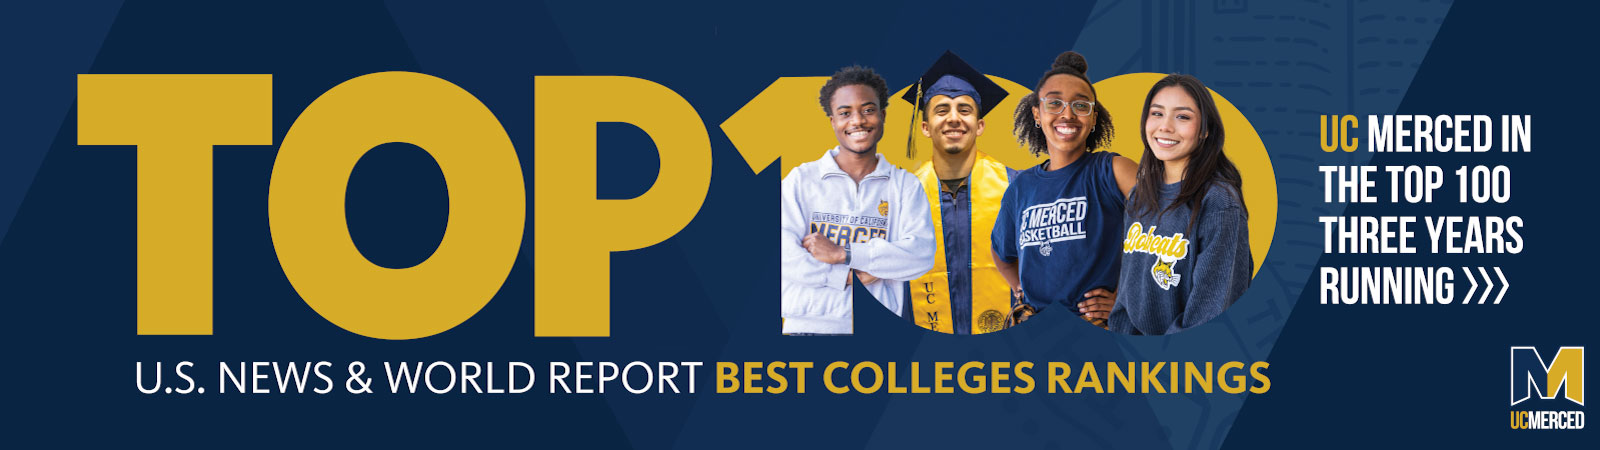 UC Merced Top 100 three years running in best colleges